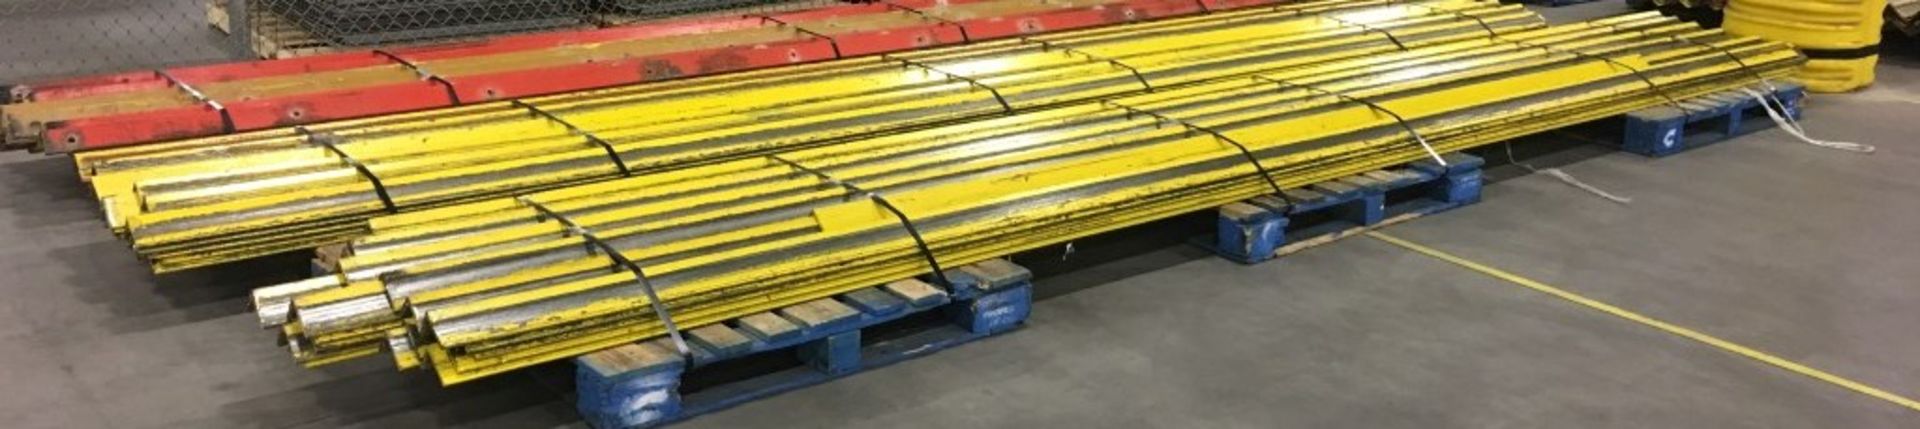 500FT OF FLOOR ANGLE GUIDE RAILS 3"" X 4""